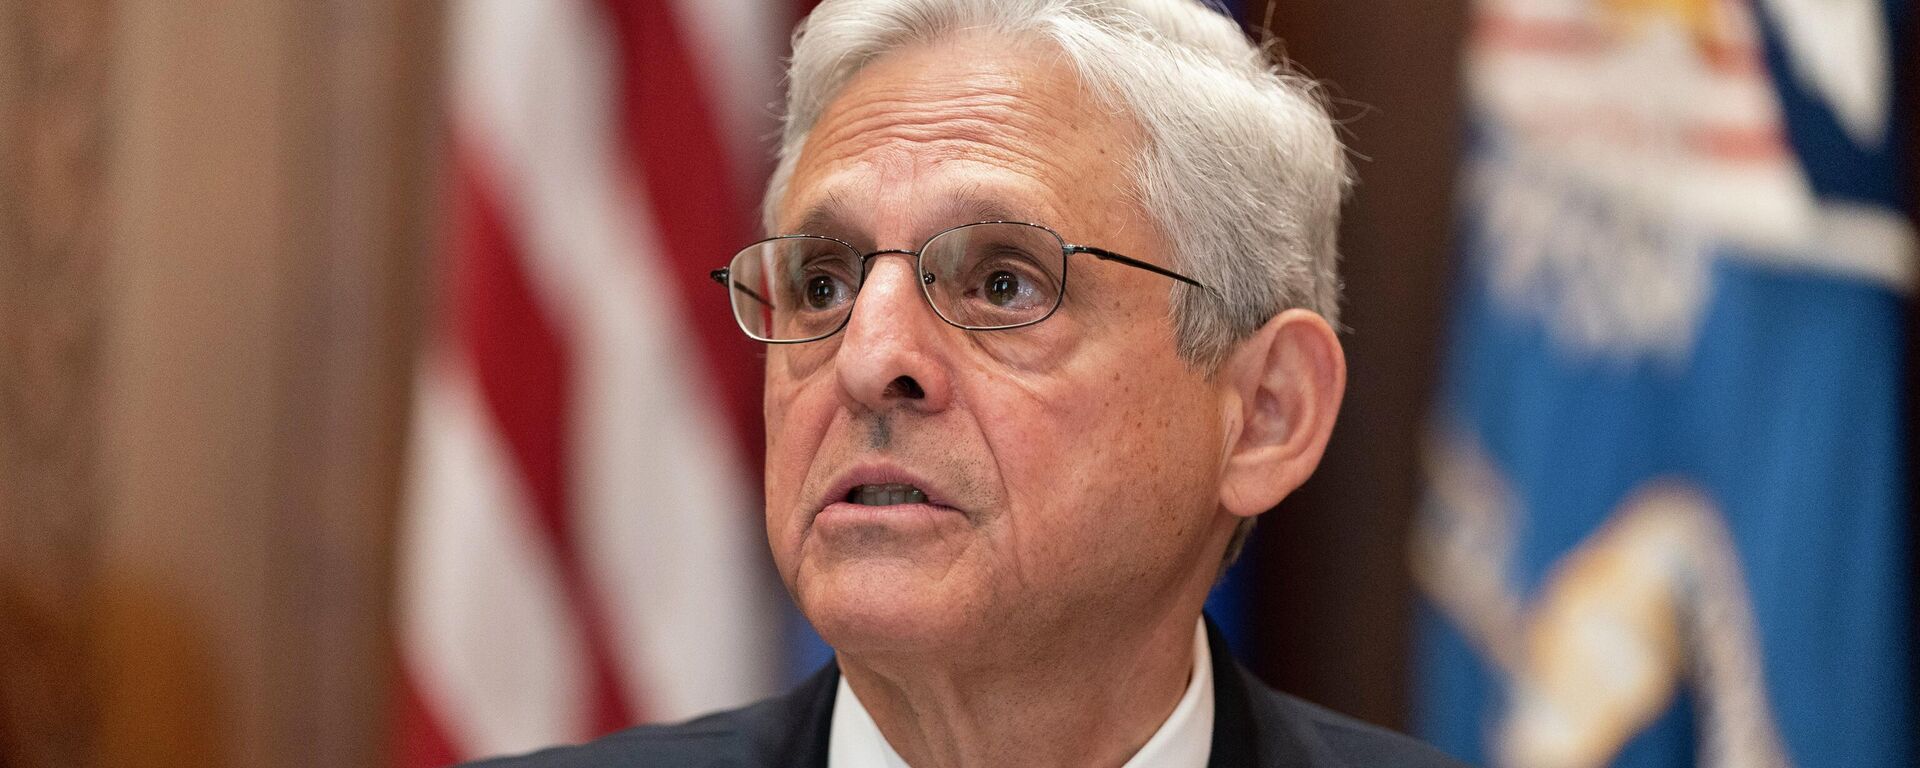 Attorney General Merrick Garland speaks to announce a team to conduct a critical incident review of the shooting in Uvalde, Texas, during a media availability at the Department of Justice , Wednesday, June 8, 2022, in Washington. - Sputnik International, 1920, 08.06.2022